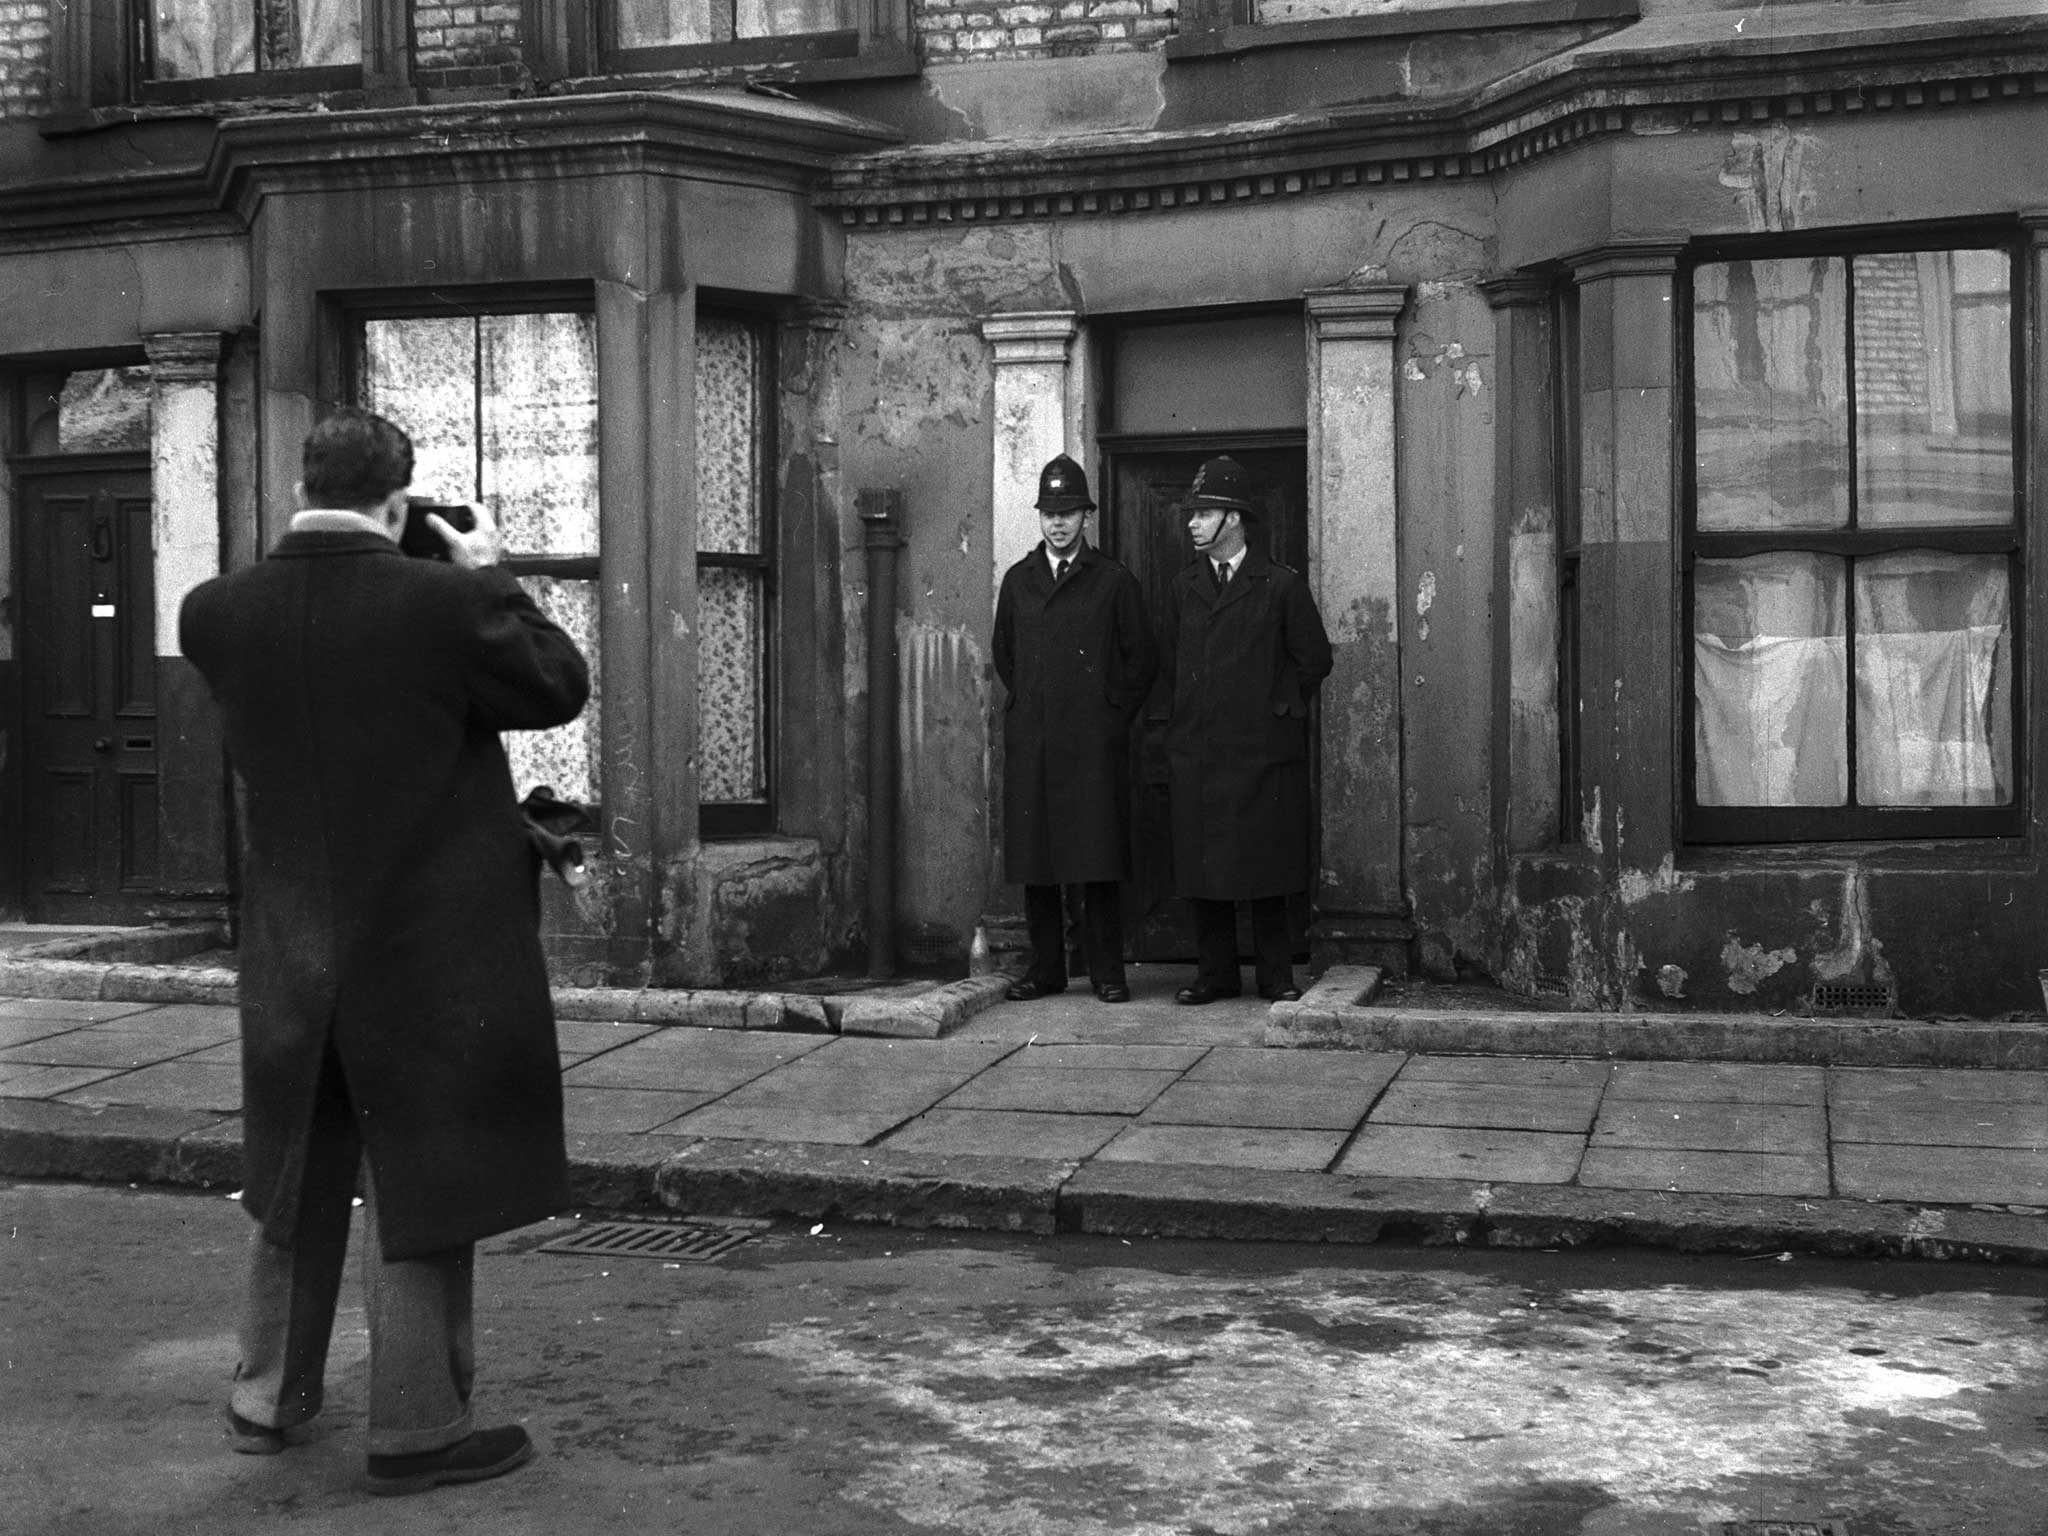 Police officers guarding the entrance to 10 Rillington Place in Notting Hill, London